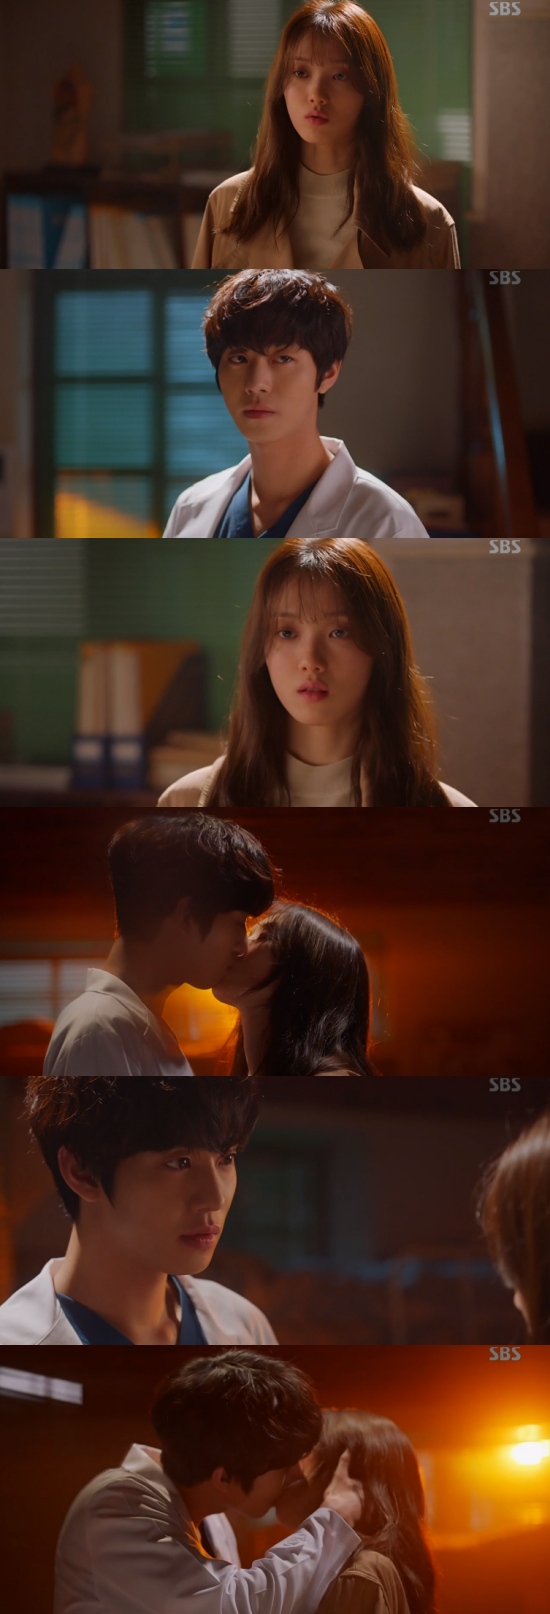 Romantic Doctor Kim Sabu 2 Lee Sung-kyung and Ahn Hyo-seop started love.In the 16th episode of SBSs monthly drama Romantic Doctor Kim Sabu 2 (the last episode), which was broadcast on the 25th, Cha Eun-jae (Lee Sung-kyung) was shown kissing Seo Woo Jin (Ahn Hyo-seop).On this day, Cha Eun-jae told Seo Woo Jin that he would return to his home, and Seo Woo Jin tried to pretend to be calm.Why dont you hold me? Im already missing that presence to you? Seo Woo Jin confessed, I was just scared, I was greedy and I was going to lose you even after I went over Line segment. Cha Eun-jae said, What is it, you.Line segment is now being passed by me, but did not you notice it? Seo Woo Jin was worried that he wanted to go to the main house, and Cha Eun-jae said, So you want to hold me?Seo Woo Jin pushed out, saying, What if I regret later? And Cha Eun-jae said, Well, what you told me.I went to Seo Woo Jin and kissed him.Seo Woo Jin narrowed the distance again and kissed when Cha Eun-jae stepped back.Photo = SBS Broadcasting Screen